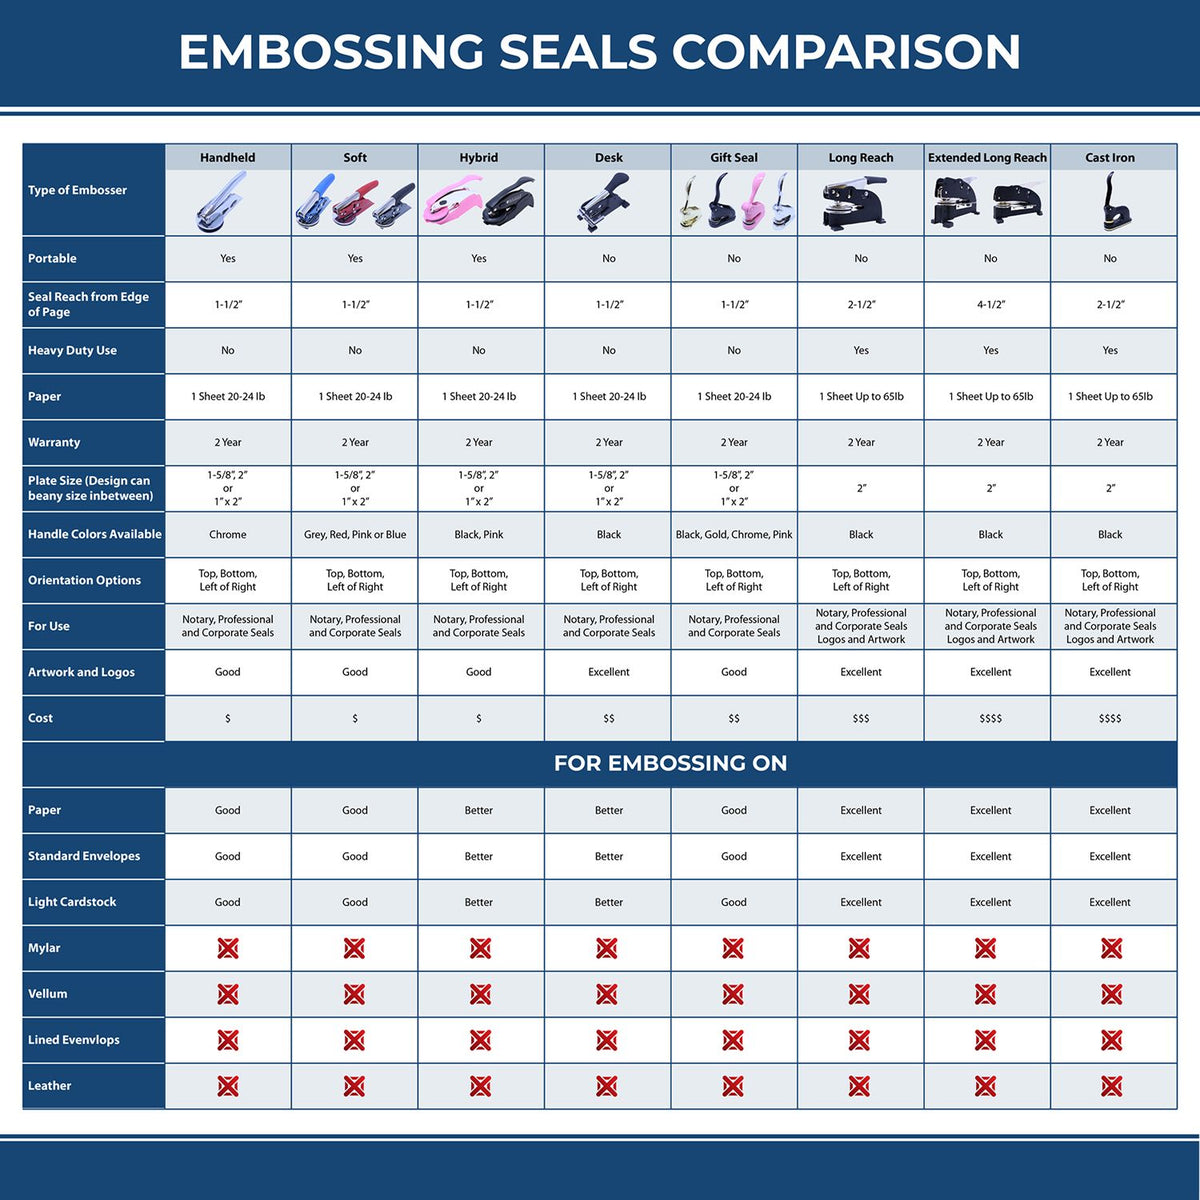 A comparison chart for the different types of mount models available for the Hybrid Indiana Geologist Seal